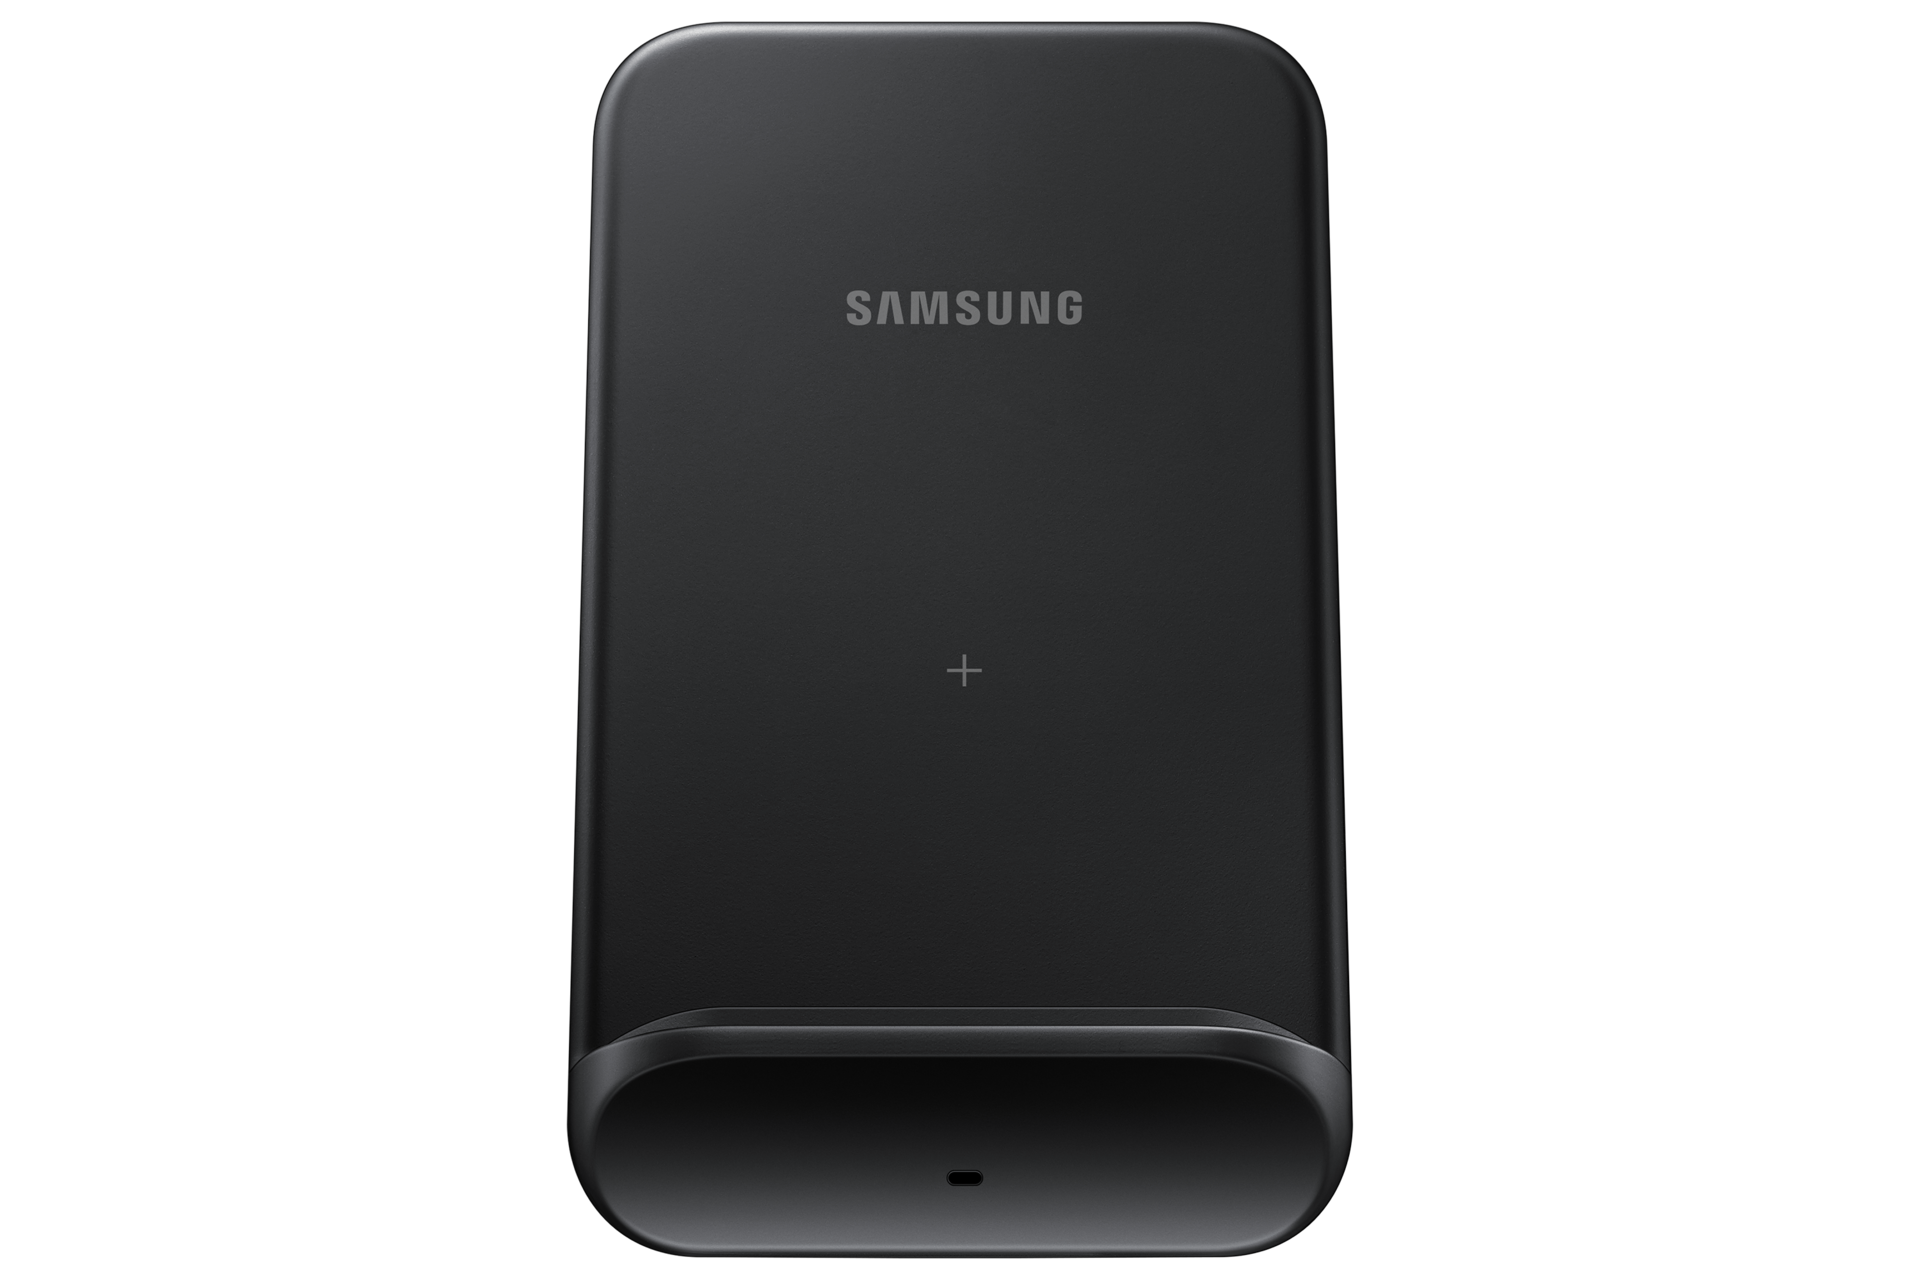 https://images.samsung.com/is/image/samsung/nz-wireless-charger-convertible-ep-n3300tbegau-frontblack-281377544?$650_519_PNG$